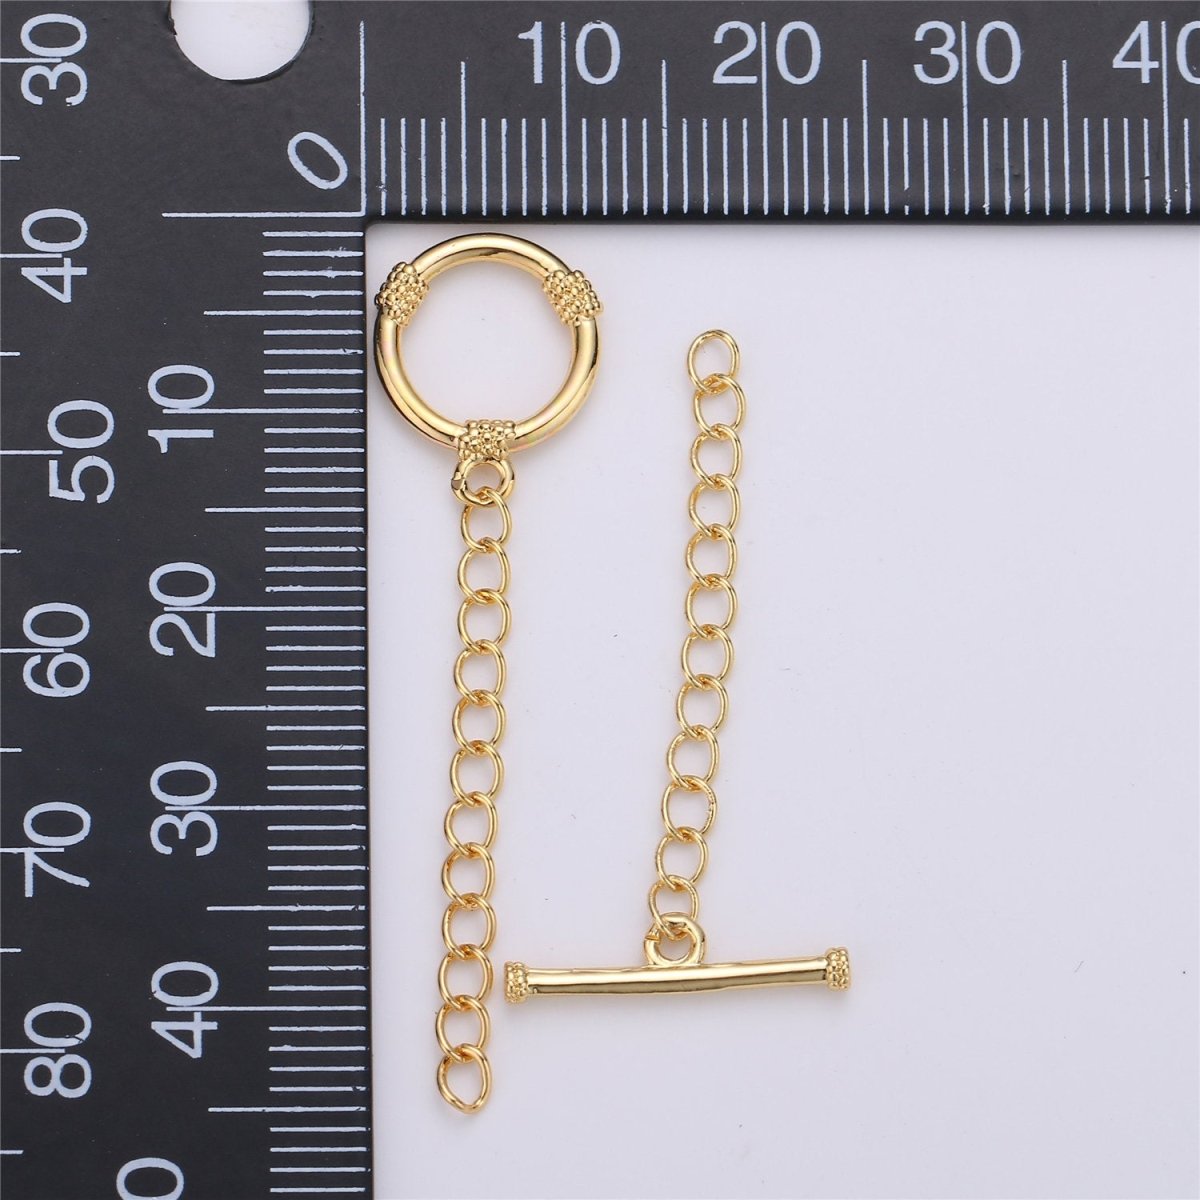 14K Gold Filled Toggle Clasp with CZ On Charm, 12mmx12mm Hoop Charm and 10mmx2mm Bar. Extender Chain is 32mm 1.5inches You Can Cut K-459 - DLUXCA